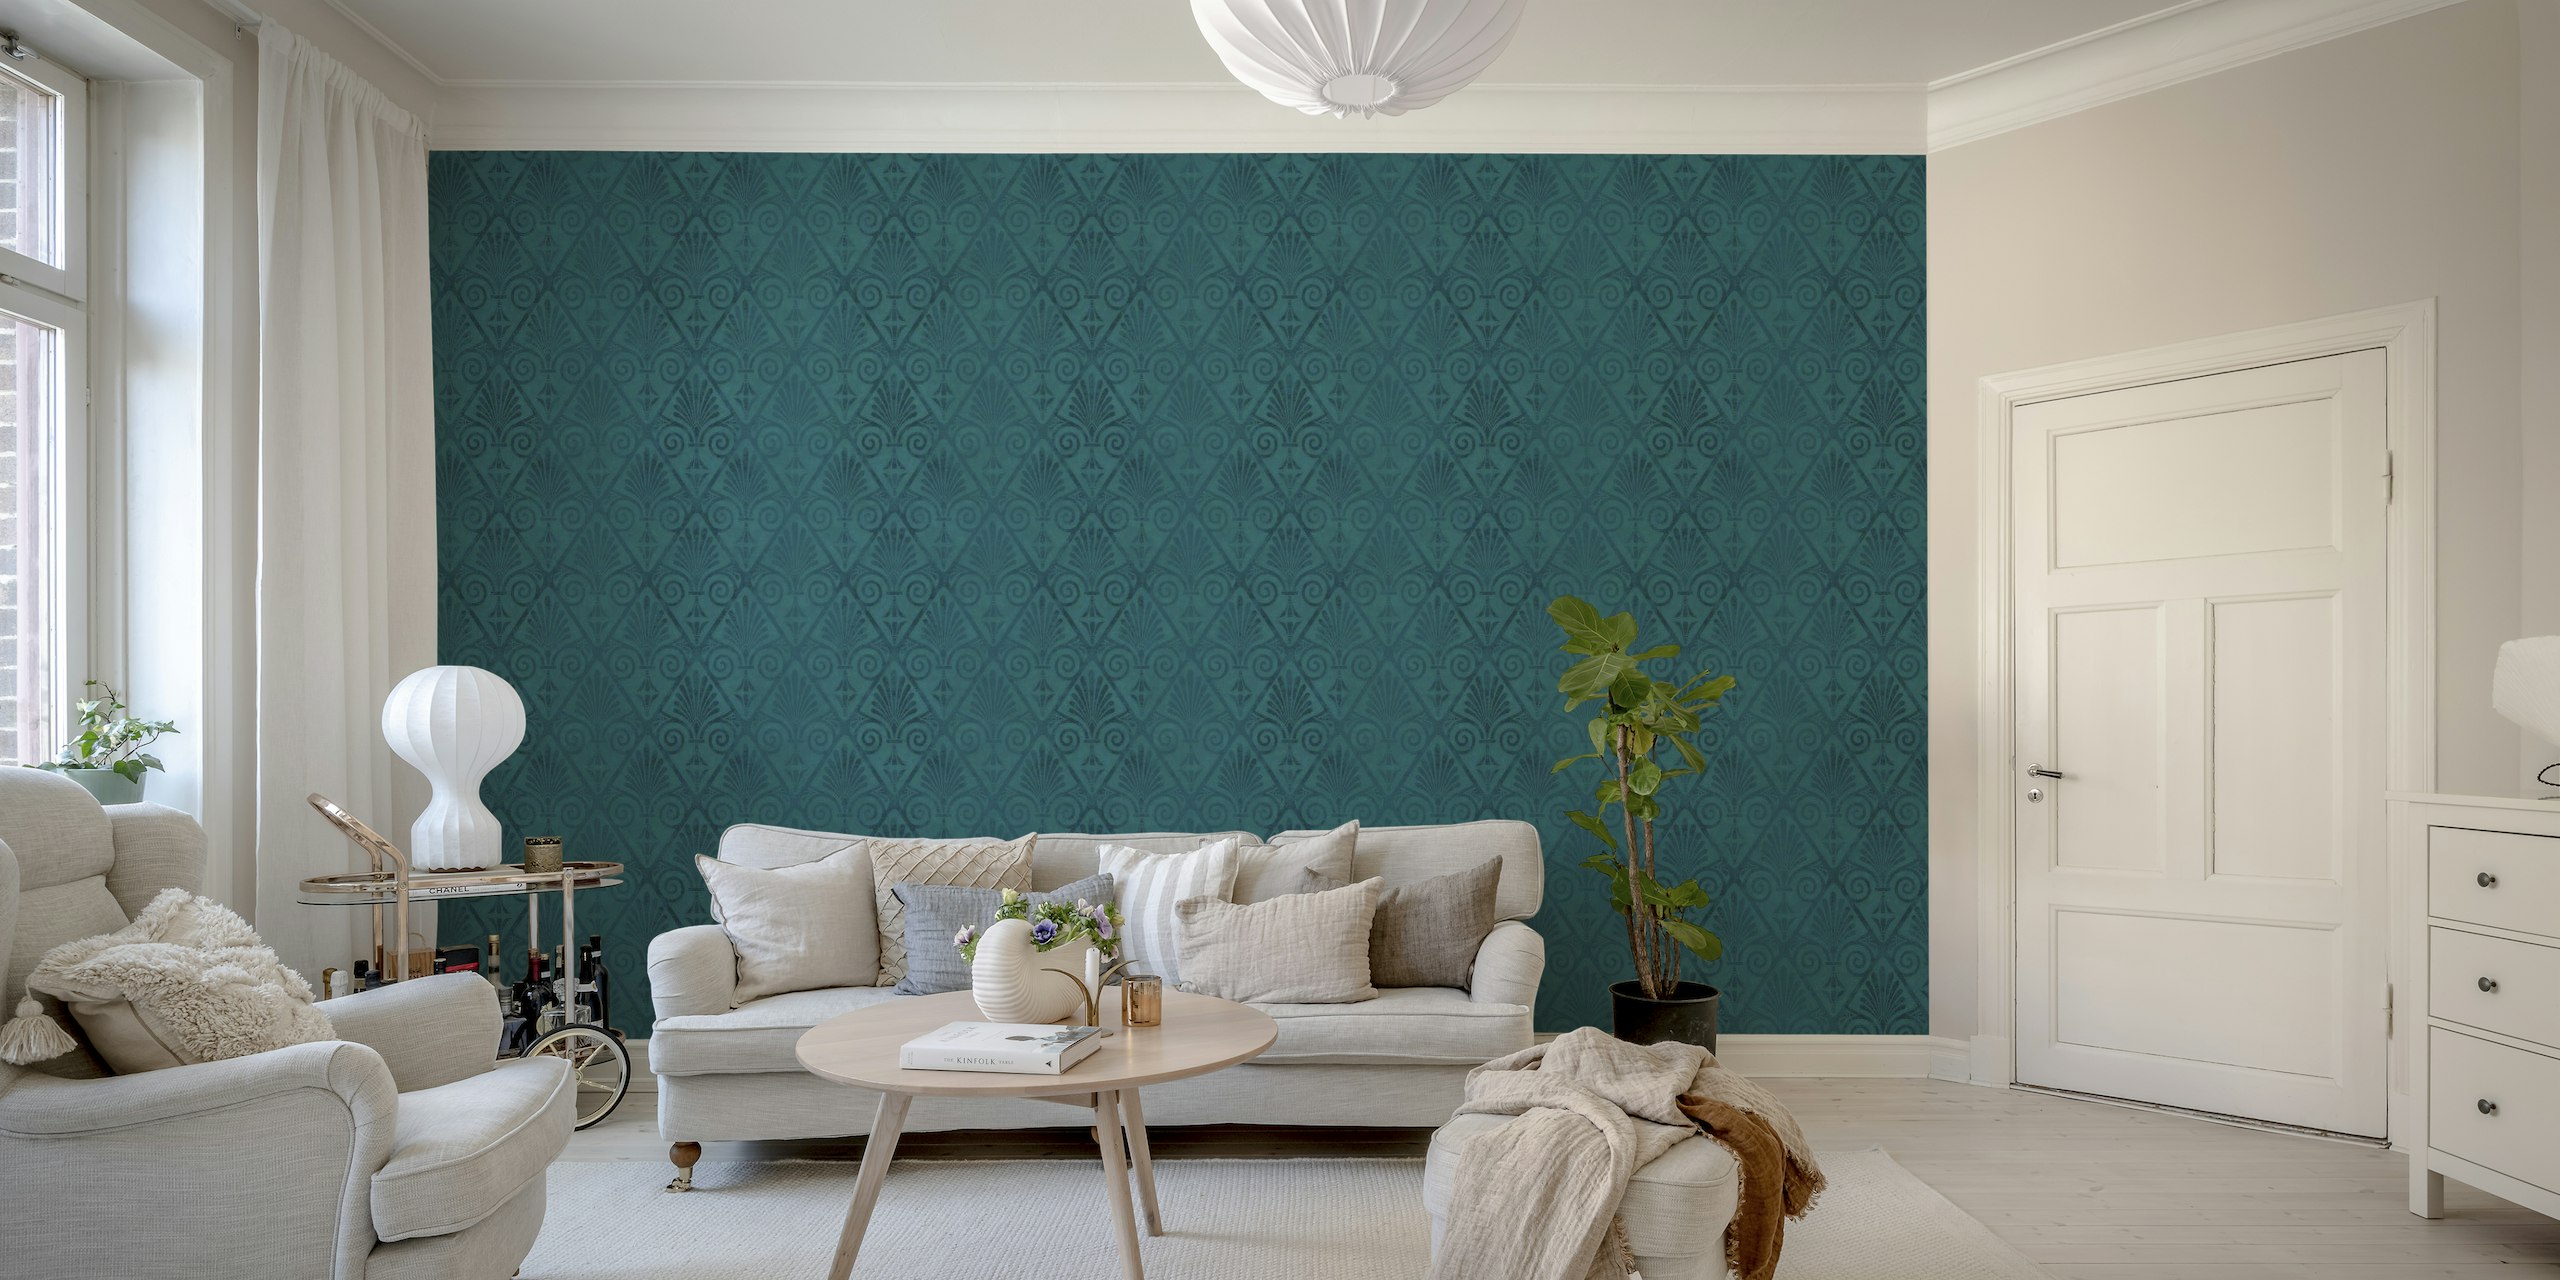 Teal Art Deco patterned wall mural from Happywall depicting luxurious geometric design.